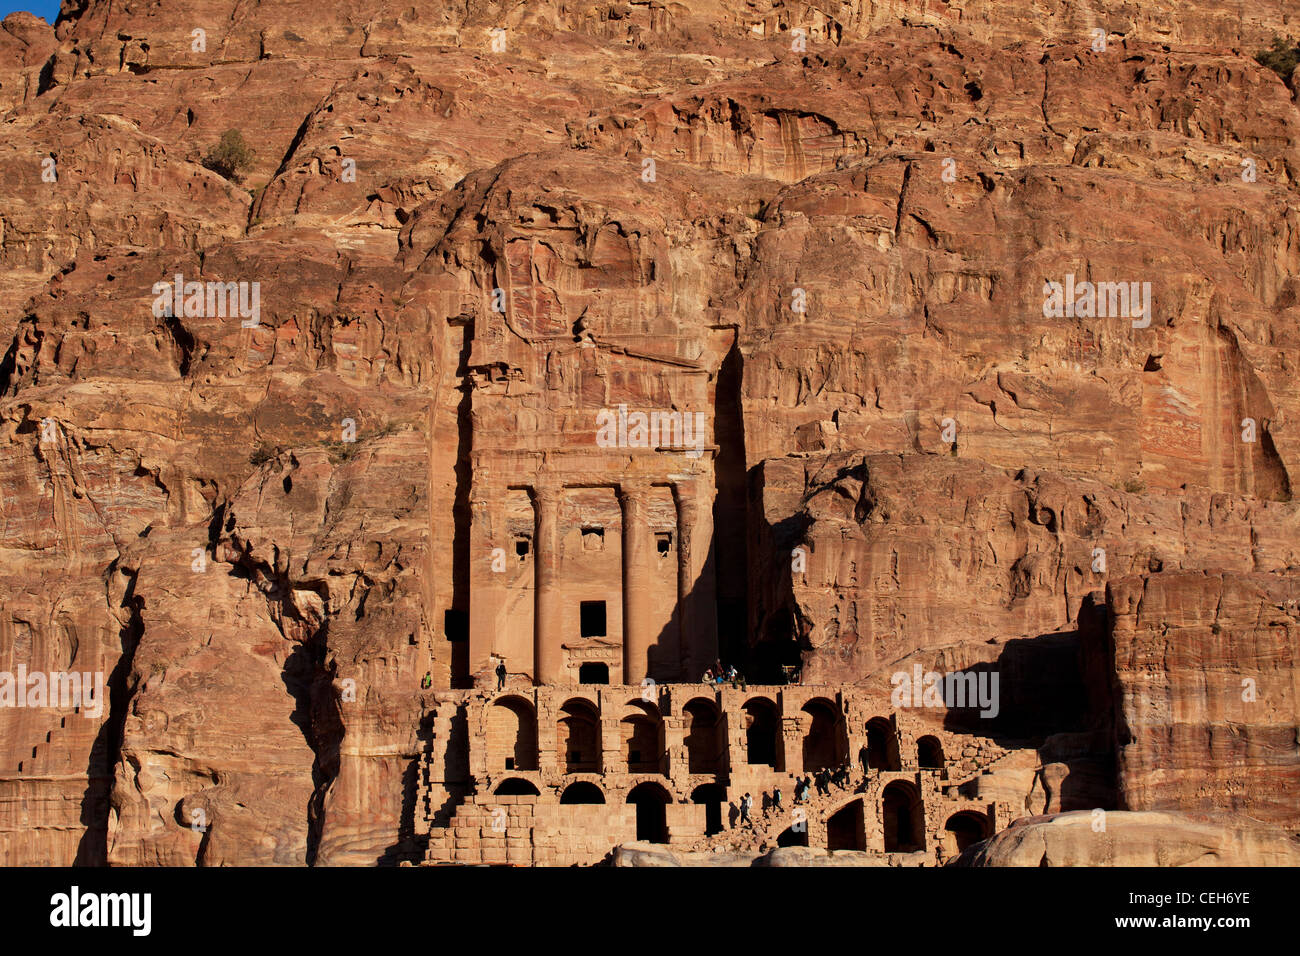 Urn tomb and Al Mahkama (law courts) at the archaeological site of Petra, Jordan. Stock Photo